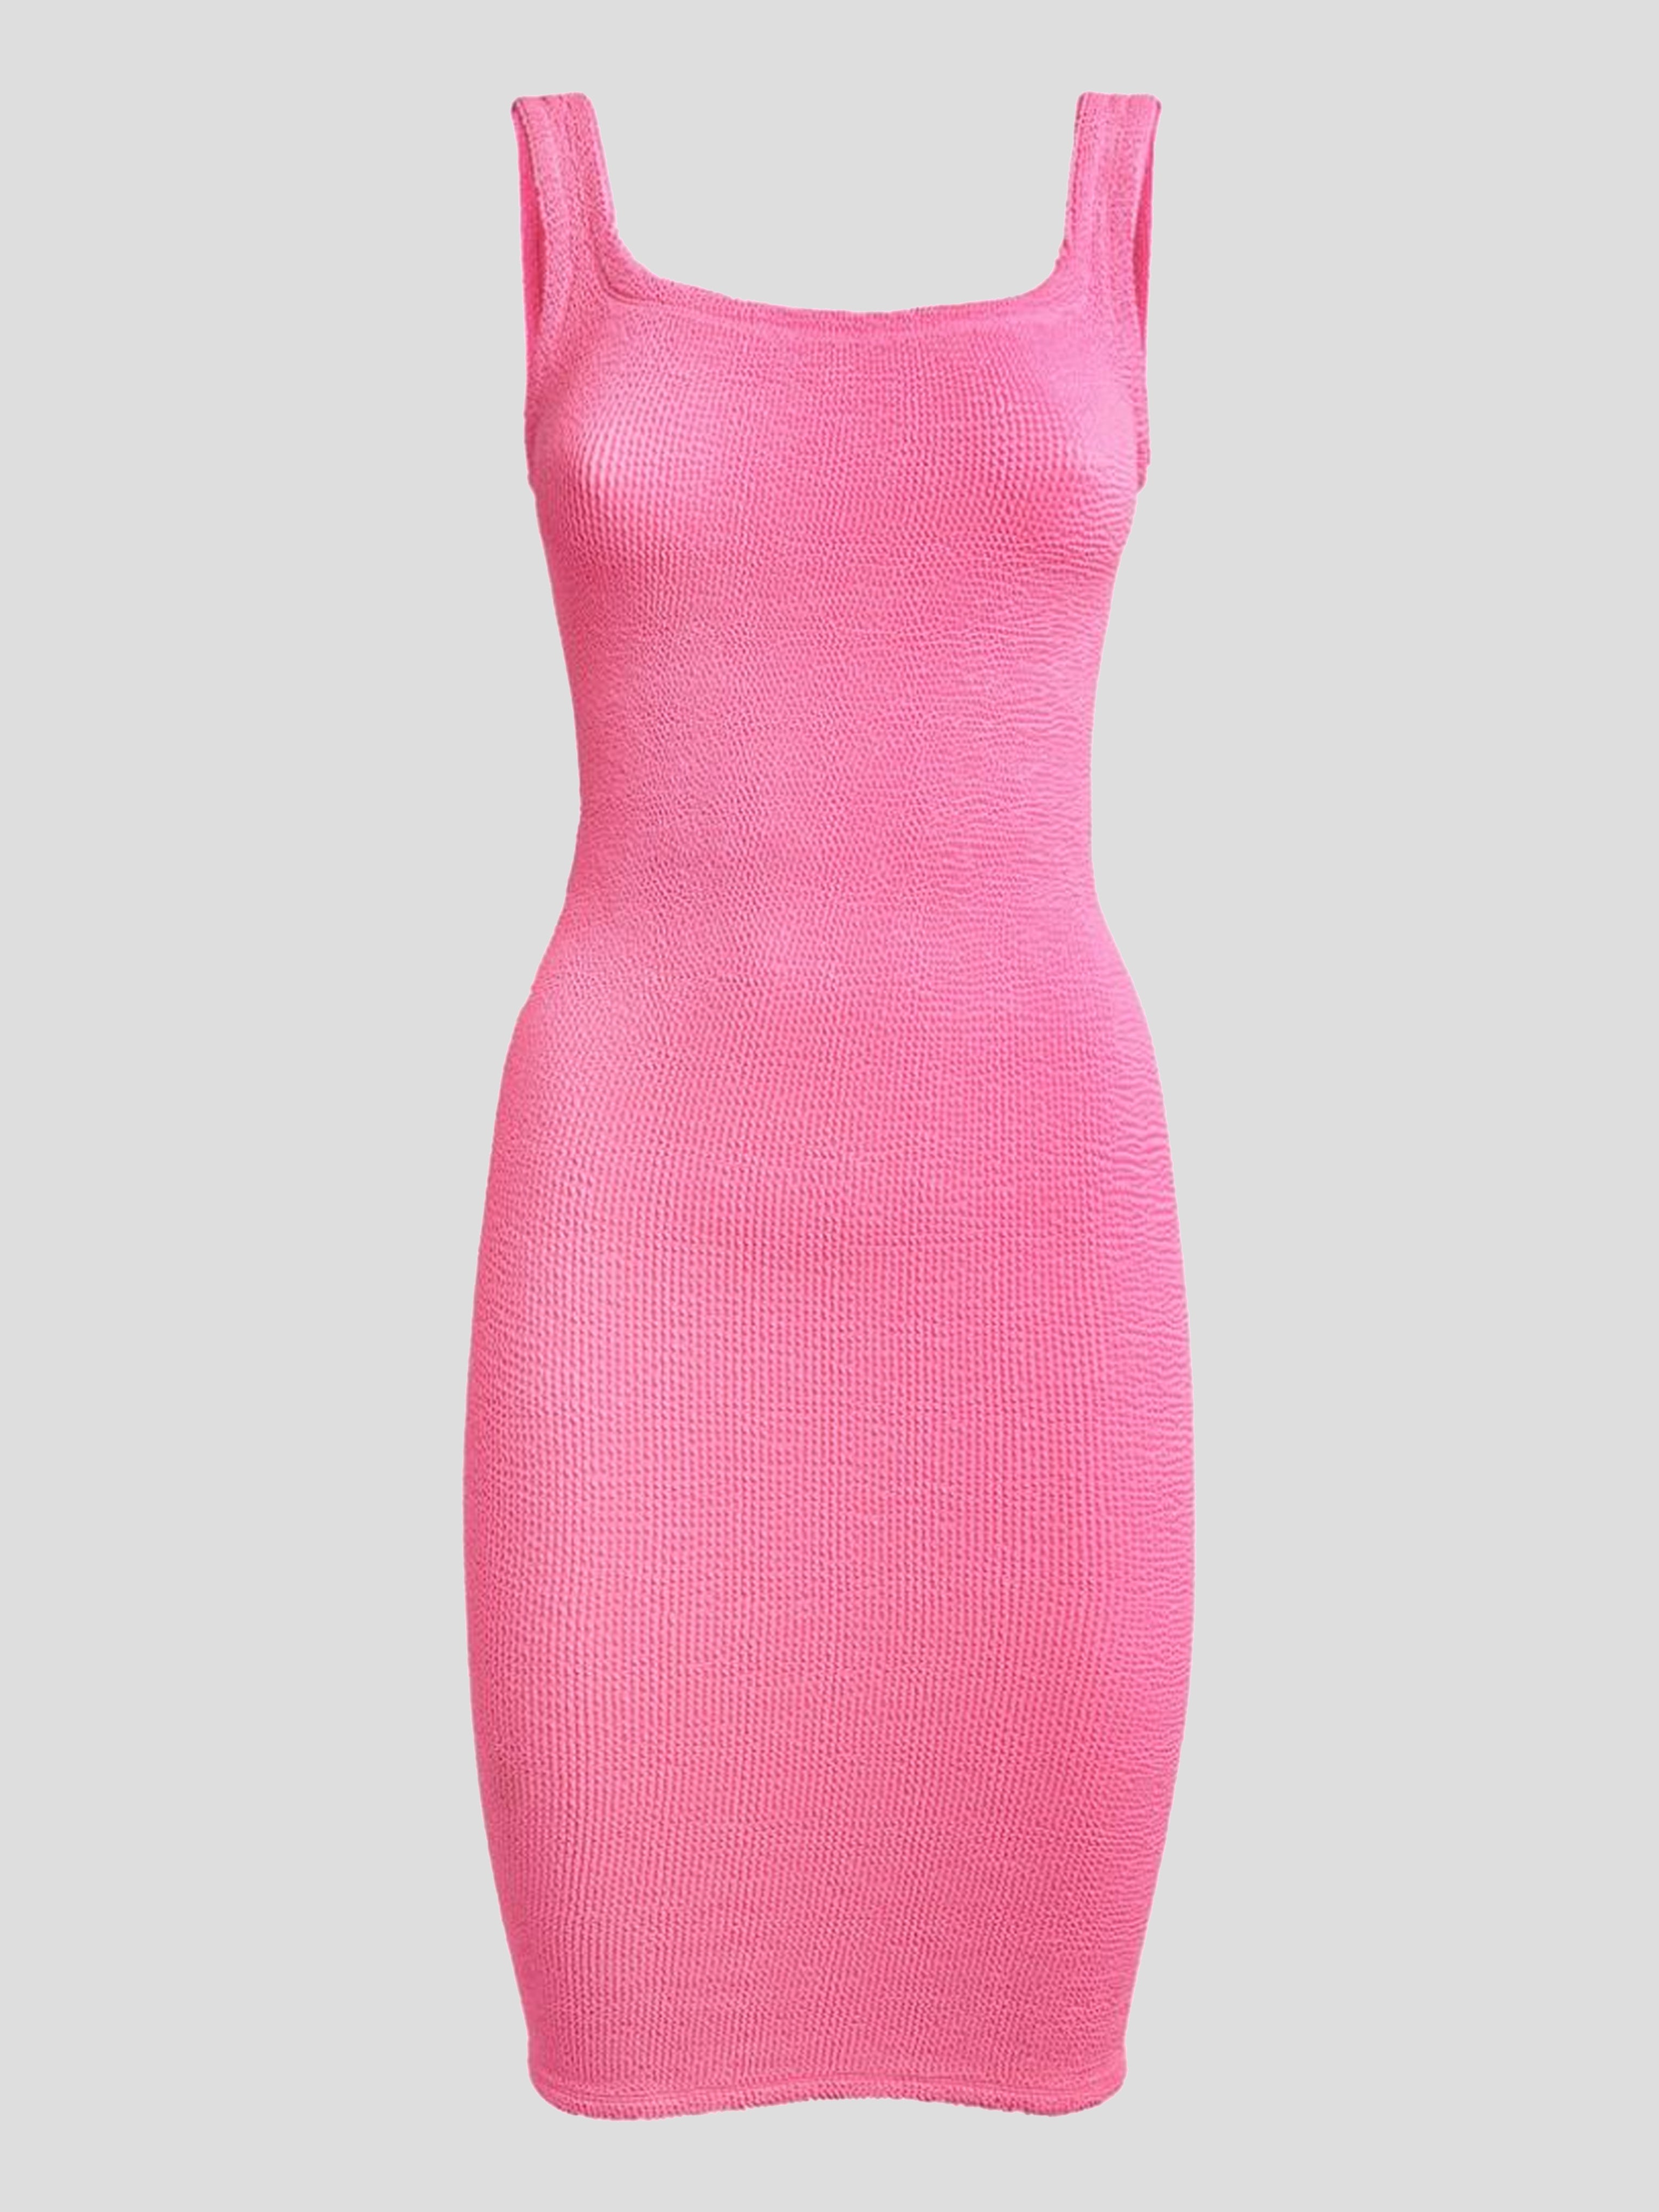 Square Neck Tank Top Dress in Pink